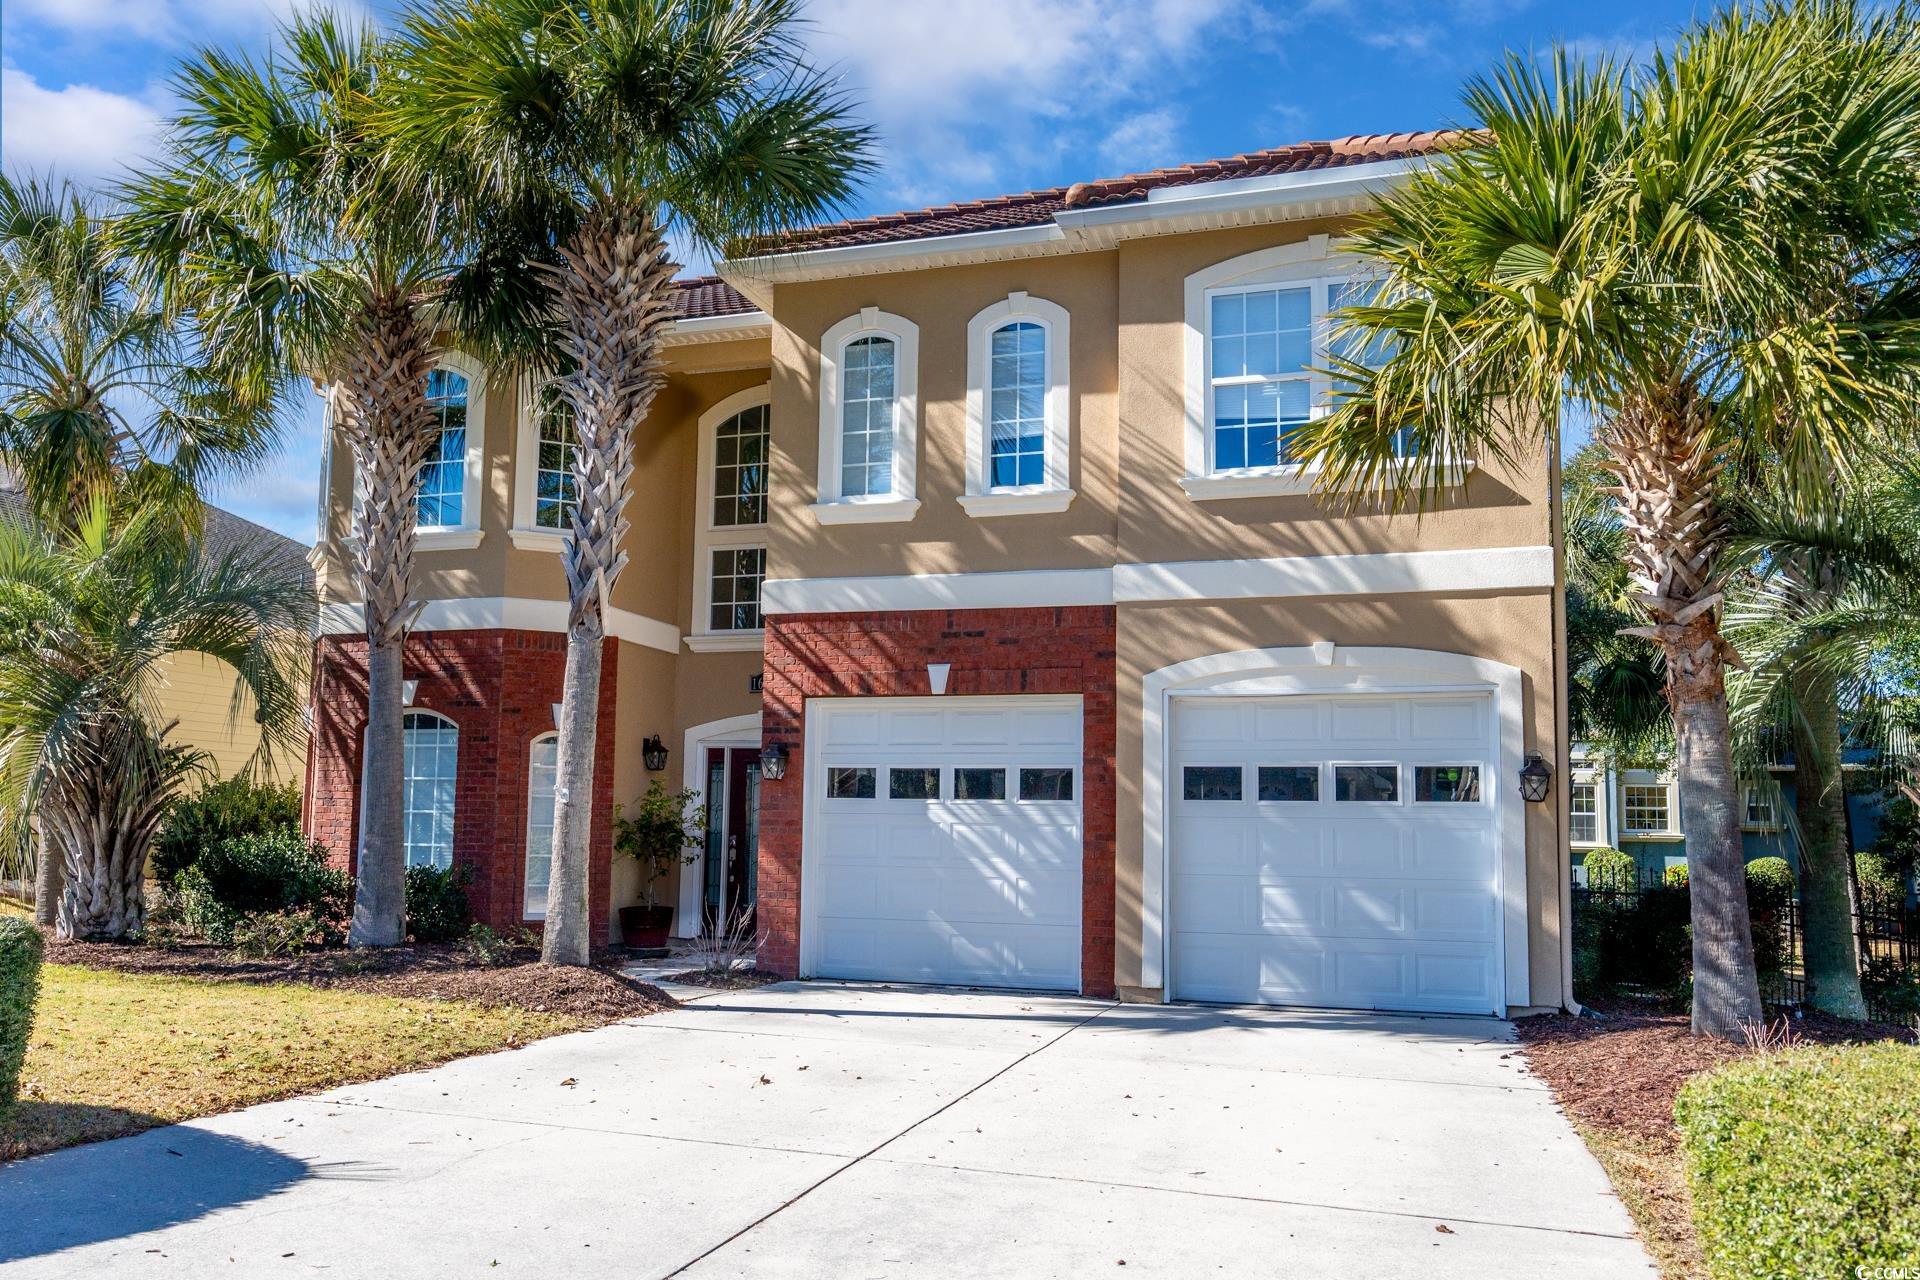 ***open house sat april 27th 12-3 & sun april 28th 1-3:30pm***  step into your dream home in the coveted sunset harbour. this beautiful 4 bedroom, 3 full & 2 half bath home is located in one of the best waterway community in north myrtle beach ! this mediterranean-inspired gem offers a spacious great room with soaring ceilings, wood floors, and a gas fireplace—perfect for cozy gatherings. the recently updated kitchen is a chef's delight, boasting custom cabinets, granite countertops, and a gas cooktop. with four bedrooms, including two master suites, this home promises comfort and luxury. both masters feature tile walk-in showers, tubs, double sinks, walk-in closets, and stylish tray ceilings.upstairs, discover two additional bedrooms and a massive bonus room with beautiful wood floors, providing endless possibilities for your lifestyle. enjoy modern living with new windows, doors, and hvac systems, along with a brand-new security system. outside, a landscaped lot with fencing and accent lighting creates a perfect oasis. take advantage of community amenities, including a clubhouse, swimming pool, hot tub, piers, gazebo, boat launch, and boat/camper storage. conveniently located near shopping, dining, hospitals and a short drive to the beach, this home offers the ultimate lifestyle. explore the beauty of sunset harbour—schedule your visit today and make this exquisite property yours. all measurements are approximate; buyer to verify. live the coastal dream!